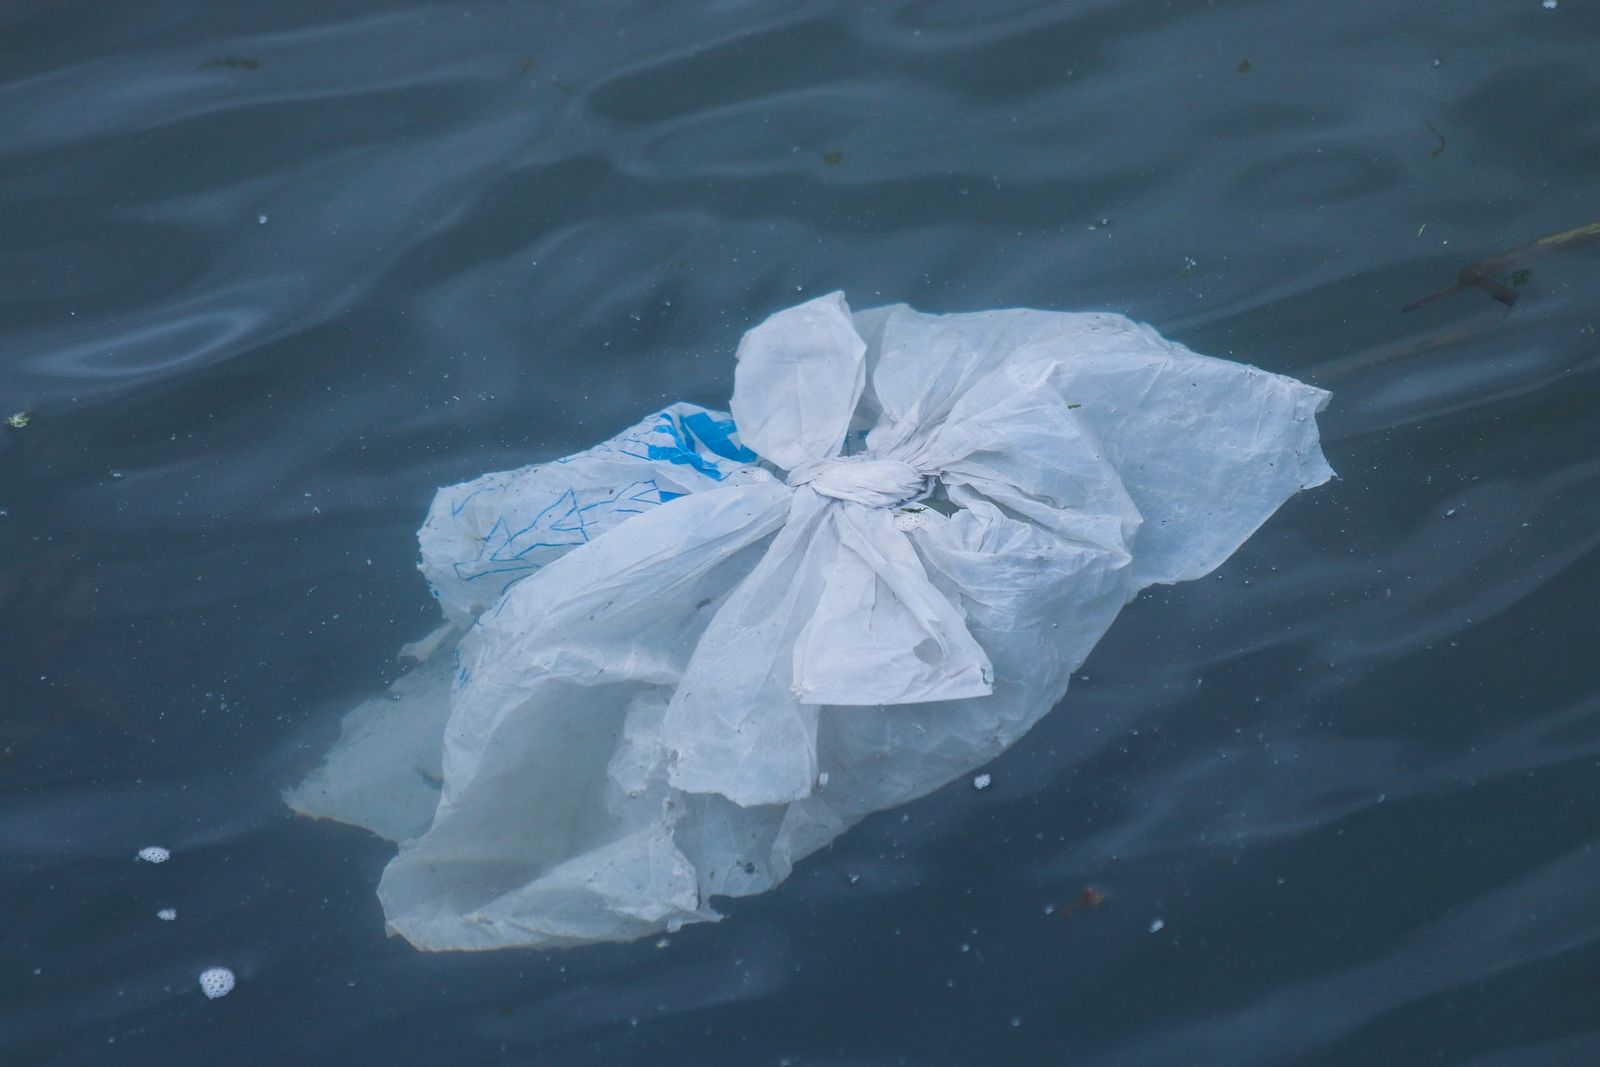 Provide input on prospective City of Vancouver plastic bag ban